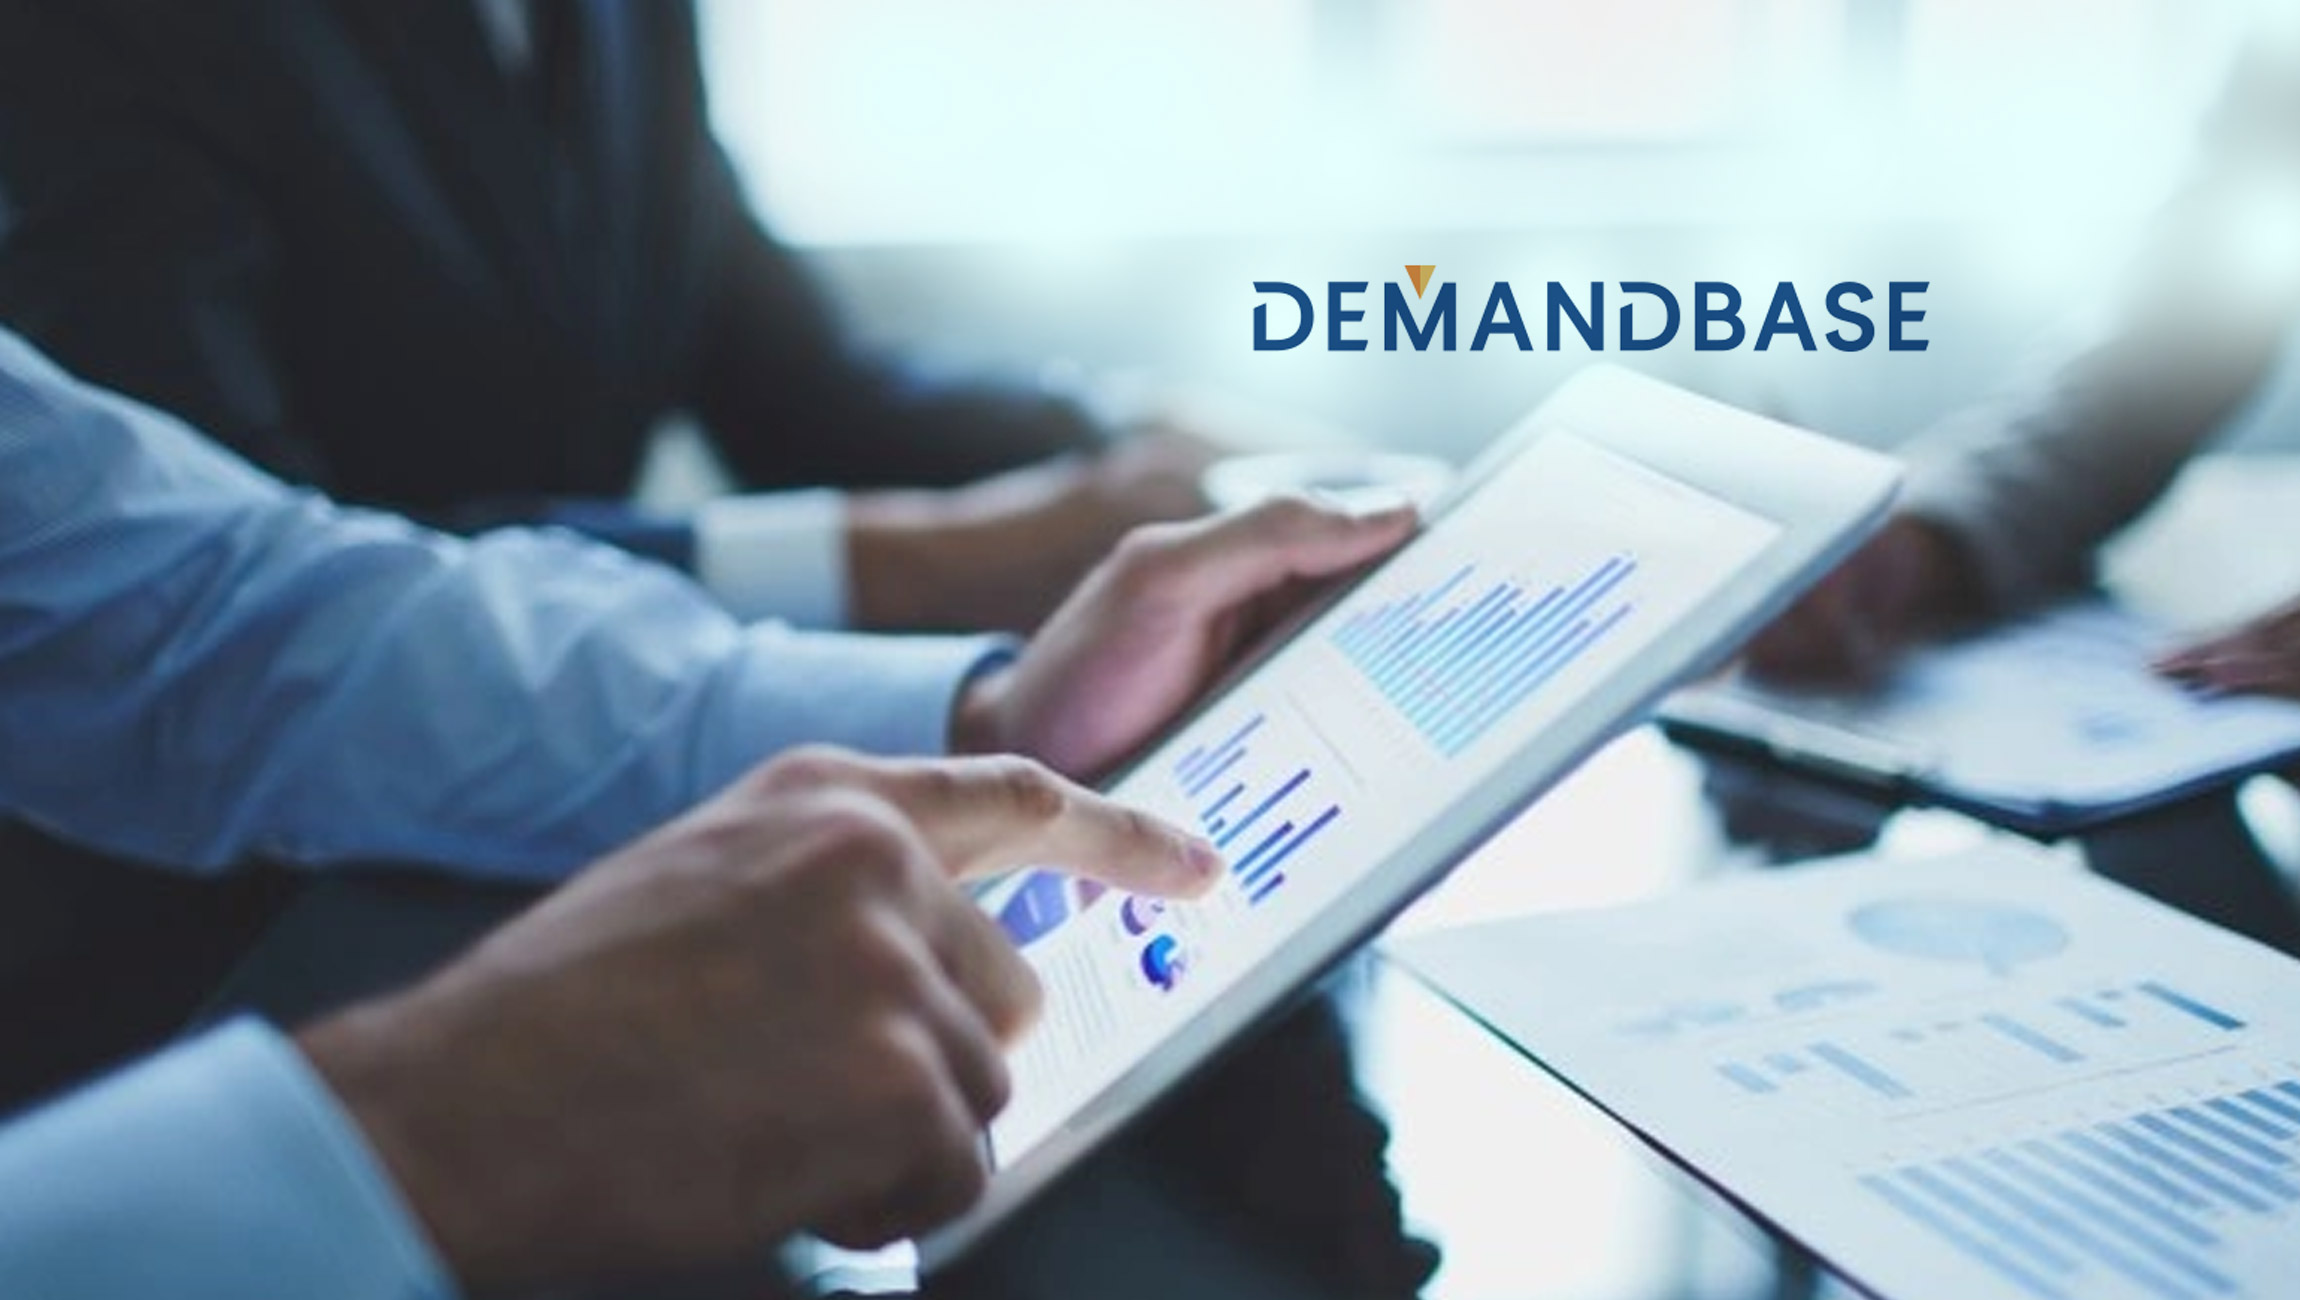 Demandbase-Lands-in-Account-Based-Sales-Technology-Vendor-Report-by-Independent-Research-Firm